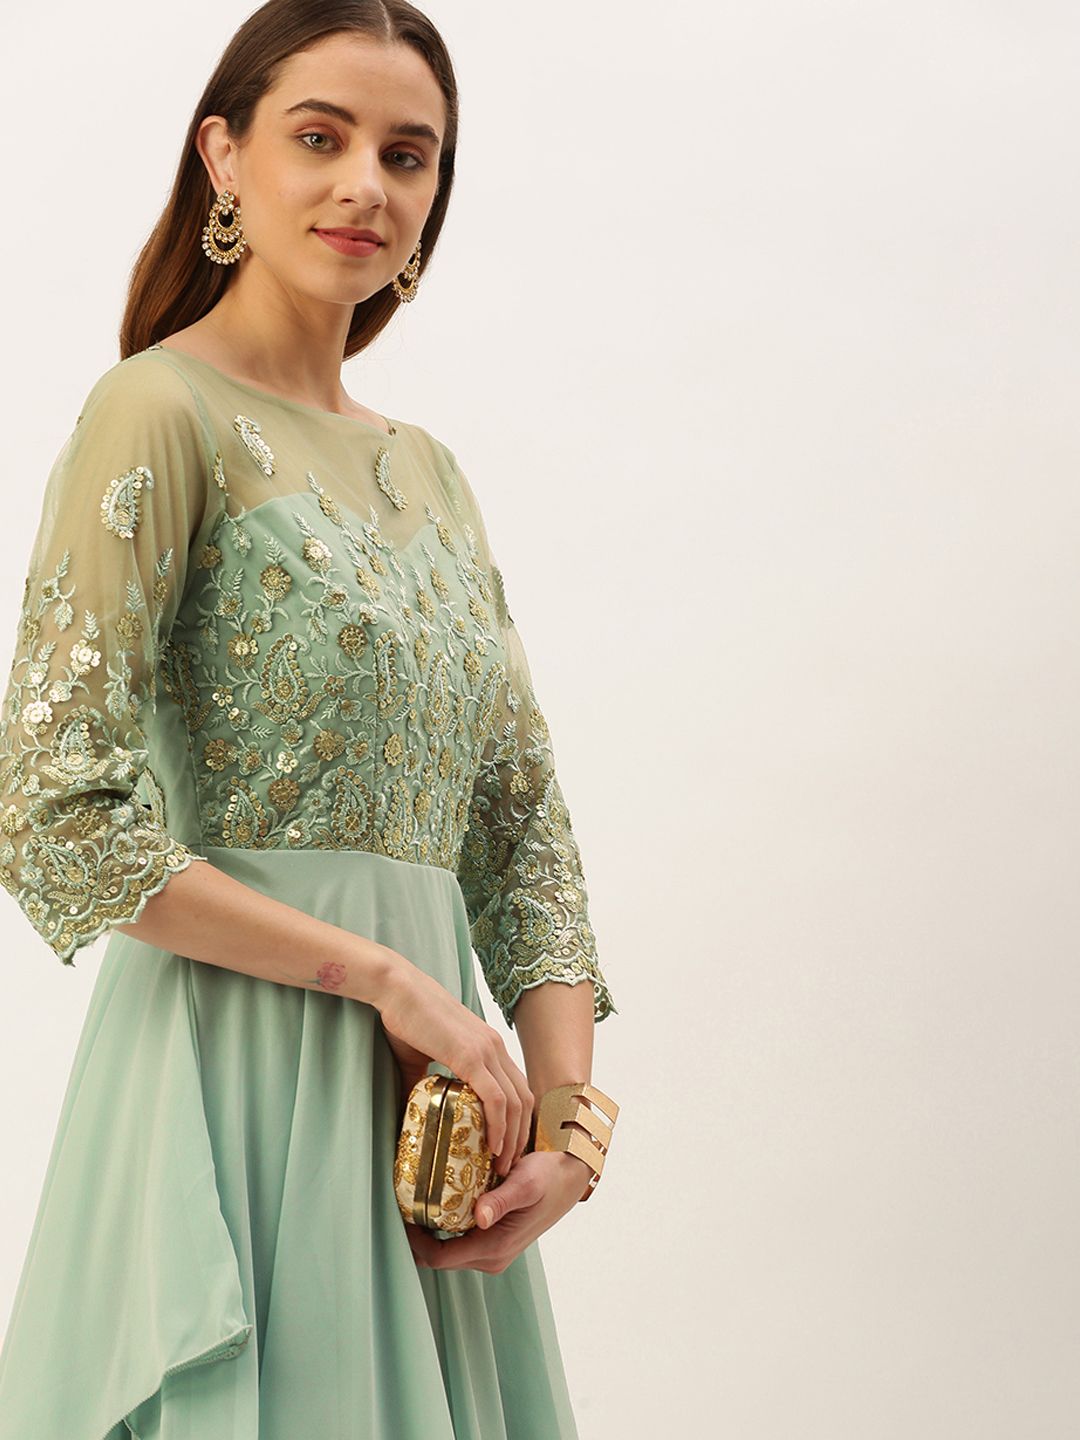 Ethnovog Green Floral Embroidered Georgette Ethnic Maxi Dress Price in India